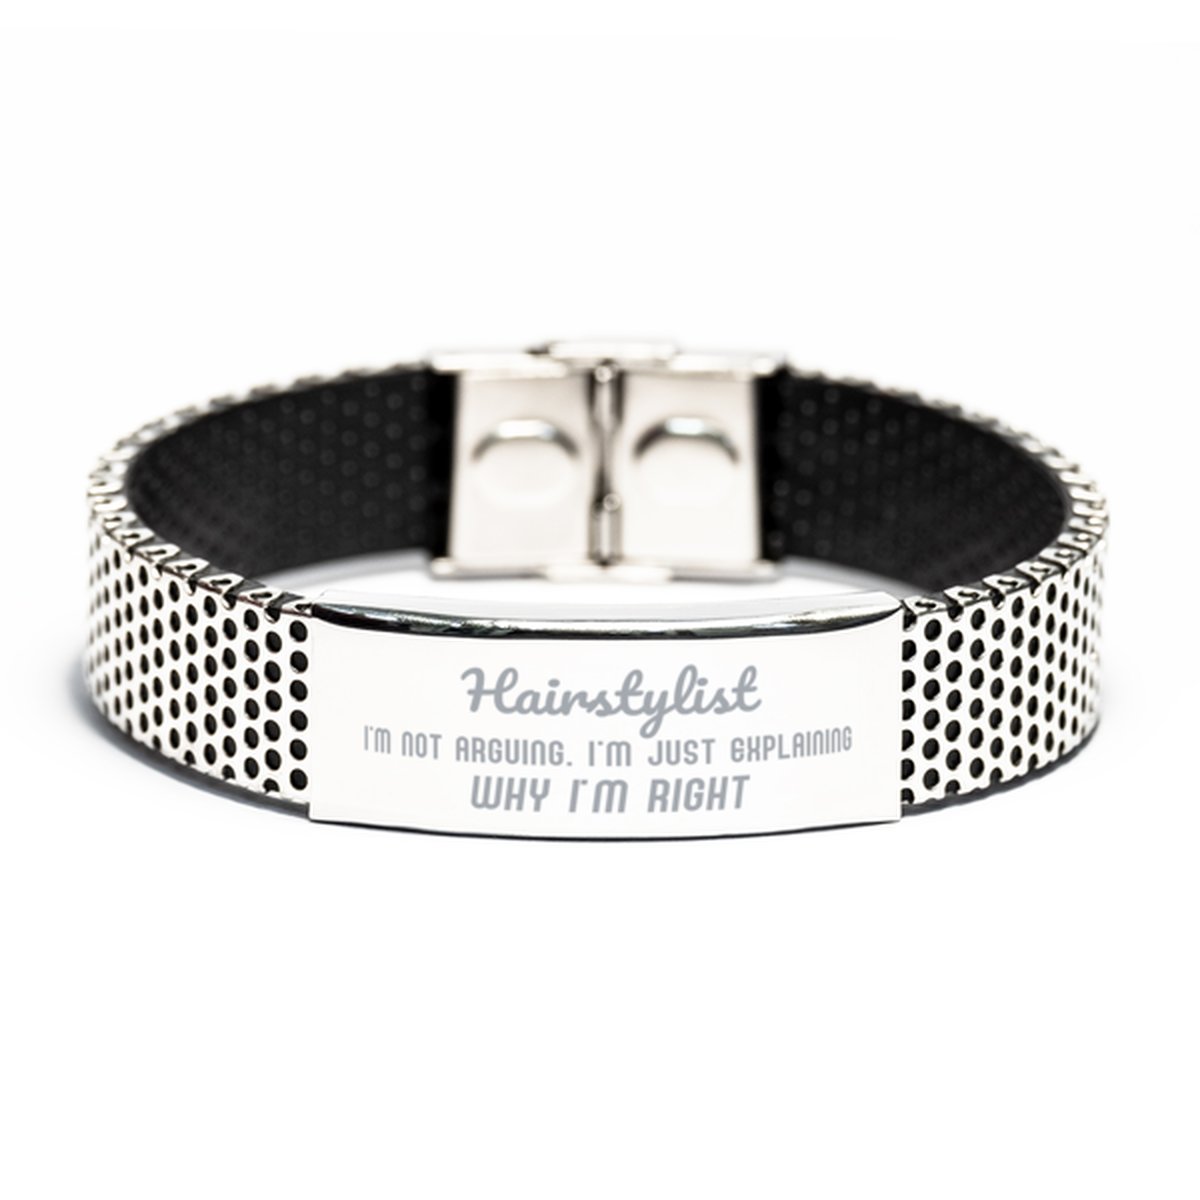 Hairstylist I'm not Arguing. I'm Just Explaining Why I'm RIGHT Stainless Steel Bracelet, Funny Saying Quote Hairstylist Gifts For Hairstylist Graduation Birthday Christmas Gifts for Men Women Coworker